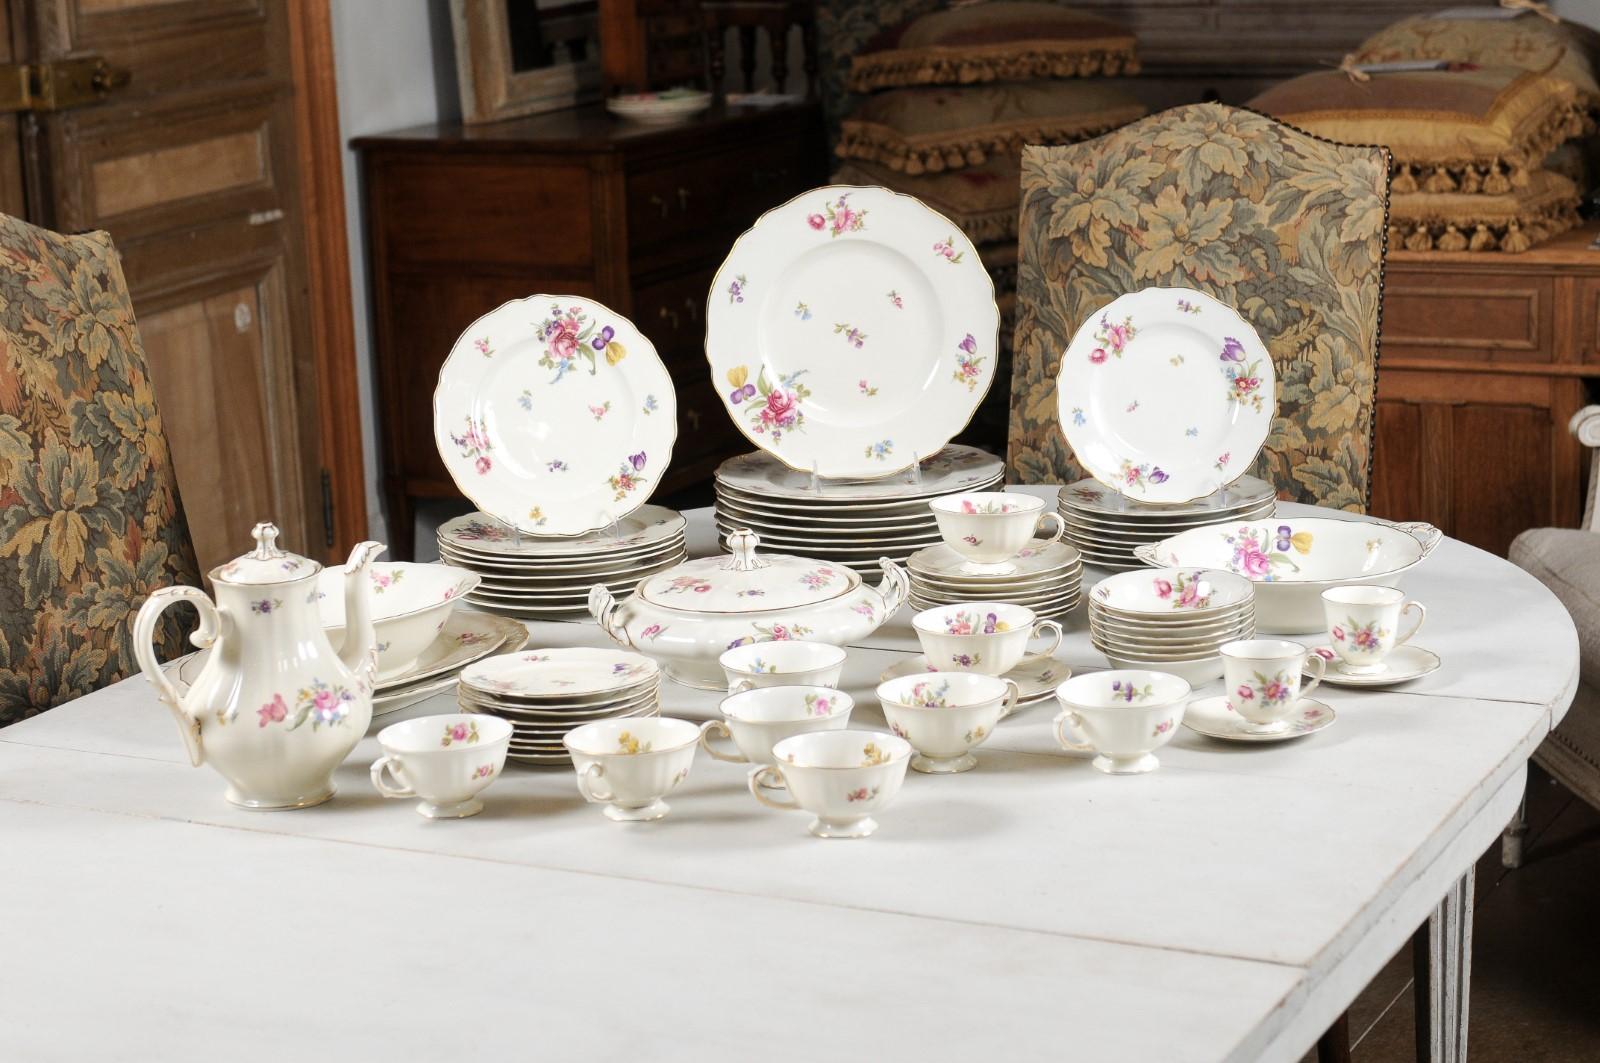 A set of 68-piece floral Franconia Selb Bavaria dining set from the mid 20th century, with pink, purple, blue and yellow flowers among others. Created in Germany during the second quarter of the 20th century, this set of porcelain dishes captures